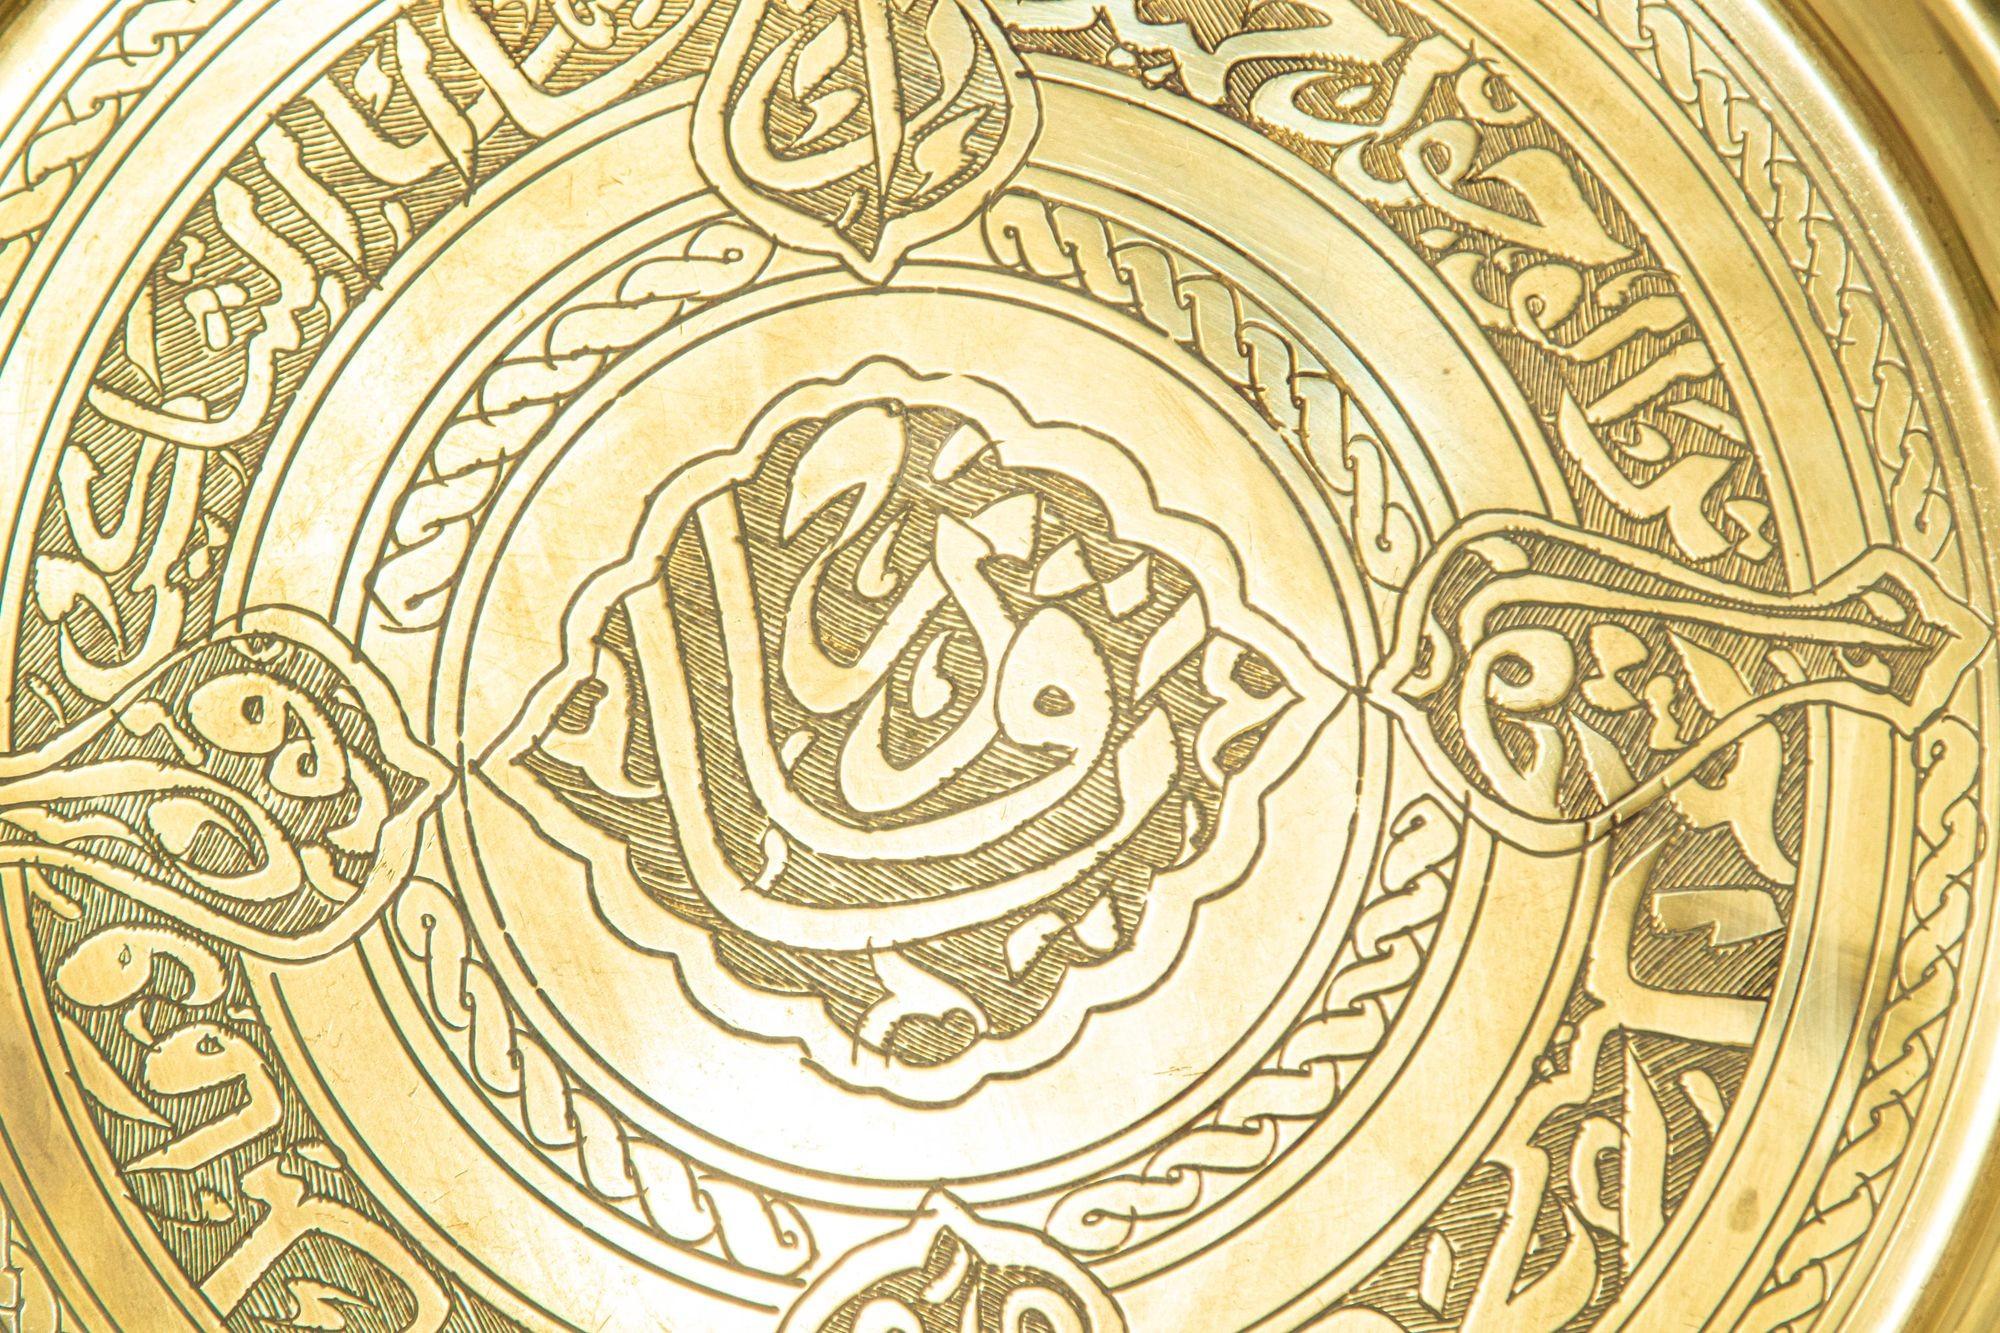 1940s Collectible Islamic Brass Round Tray , handcrafted, hammered and chased with intricate designs and Arabic writing.
Decorative circular antique polished brass tray with etched signature of the artist maker on top pf the tray.
Dimensions: 12.5